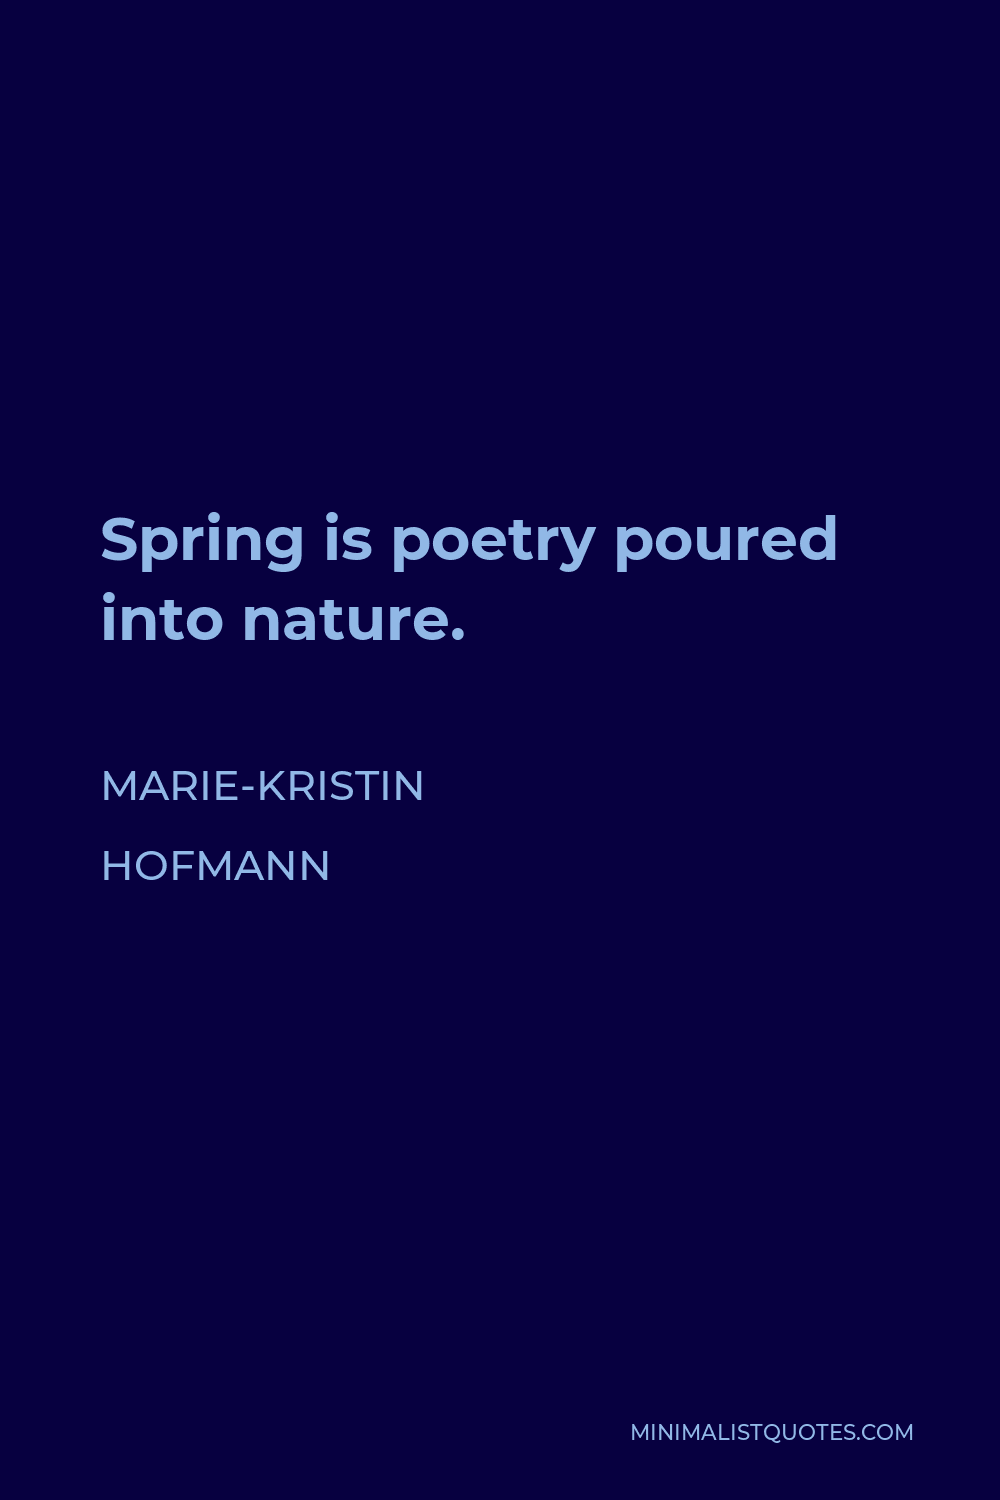 Marie-Kristin Hofmann Quote - Spring is poetry poured into nature.